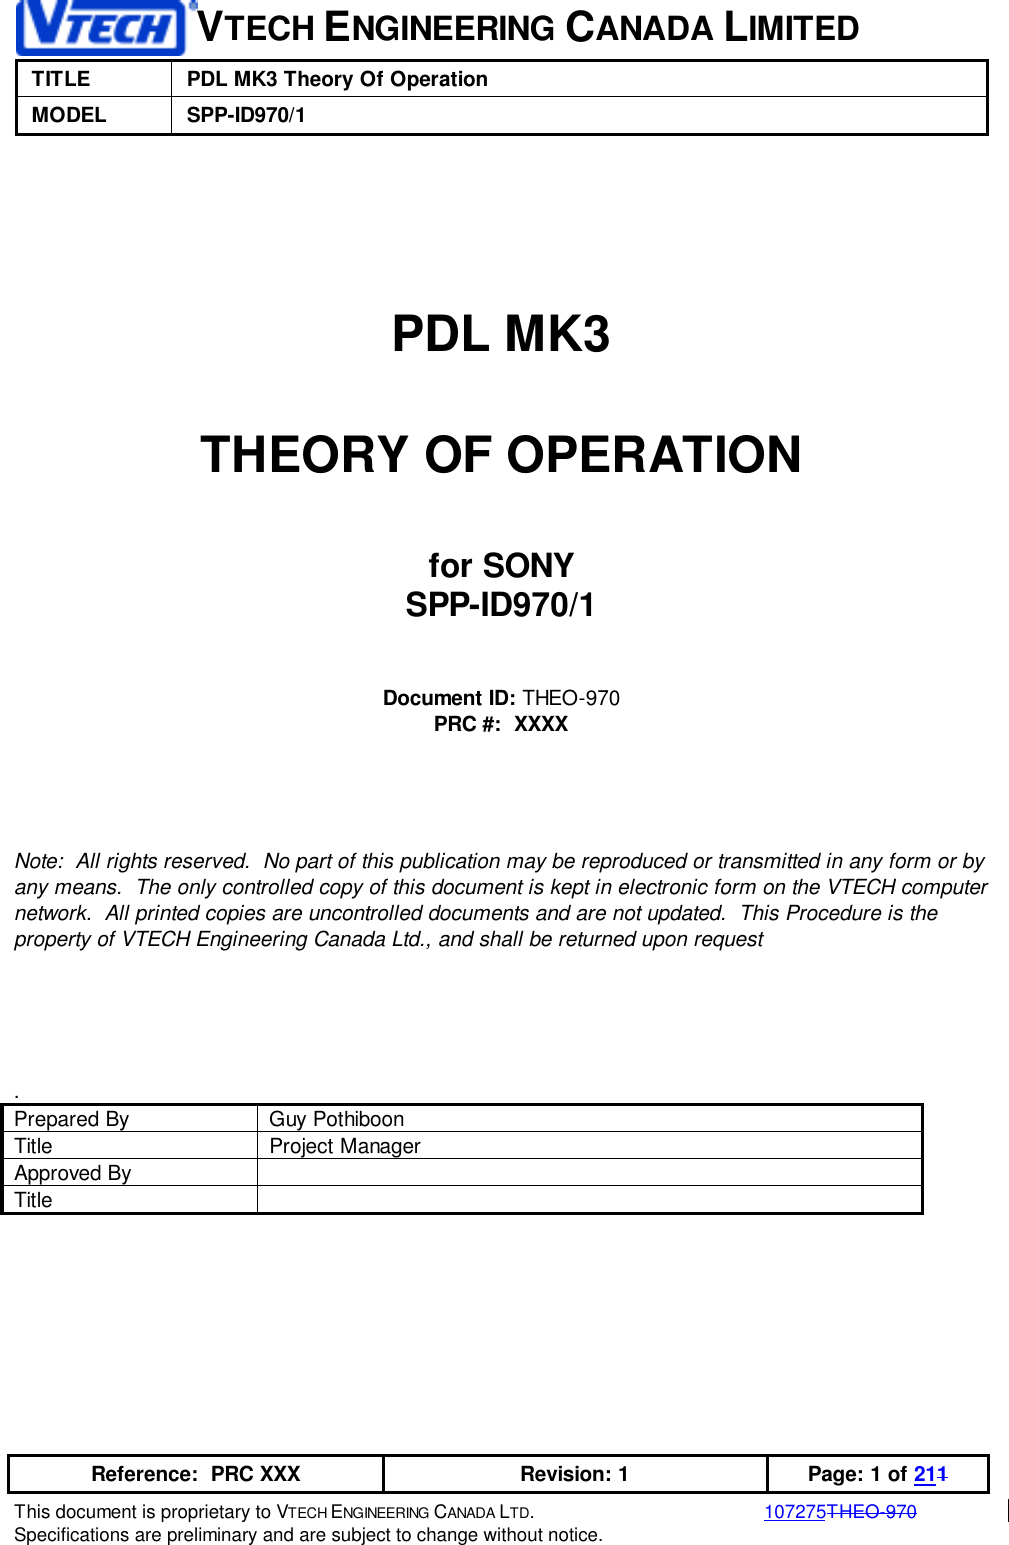 VTECH ENGINEERING CANADA LIMITEDTITLE PDL MK3 Theory Of OperationMODEL SPP-ID970/1Reference:  PRC XXX Revision: 1 Page: 1 of 211This document is proprietary to VTECH ENGINEERING CANADA LTD.107275THEO-970Specifications are preliminary and are subject to change without notice.PDL MK3THEORY OF OPERATIONfor SONYSPP-ID970/1Document ID: THEO-970PRC #:  XXXXNote:  All rights reserved.  No part of this publication may be reproduced or transmitted in any form or byany means.  The only controlled copy of this document is kept in electronic form on the VTECH computernetwork.  All printed copies are uncontrolled documents and are not updated.  This Procedure is theproperty of VTECH Engineering Canada Ltd., and shall be returned upon request.Prepared By Guy PothiboonTitle Project ManagerApproved ByTitle